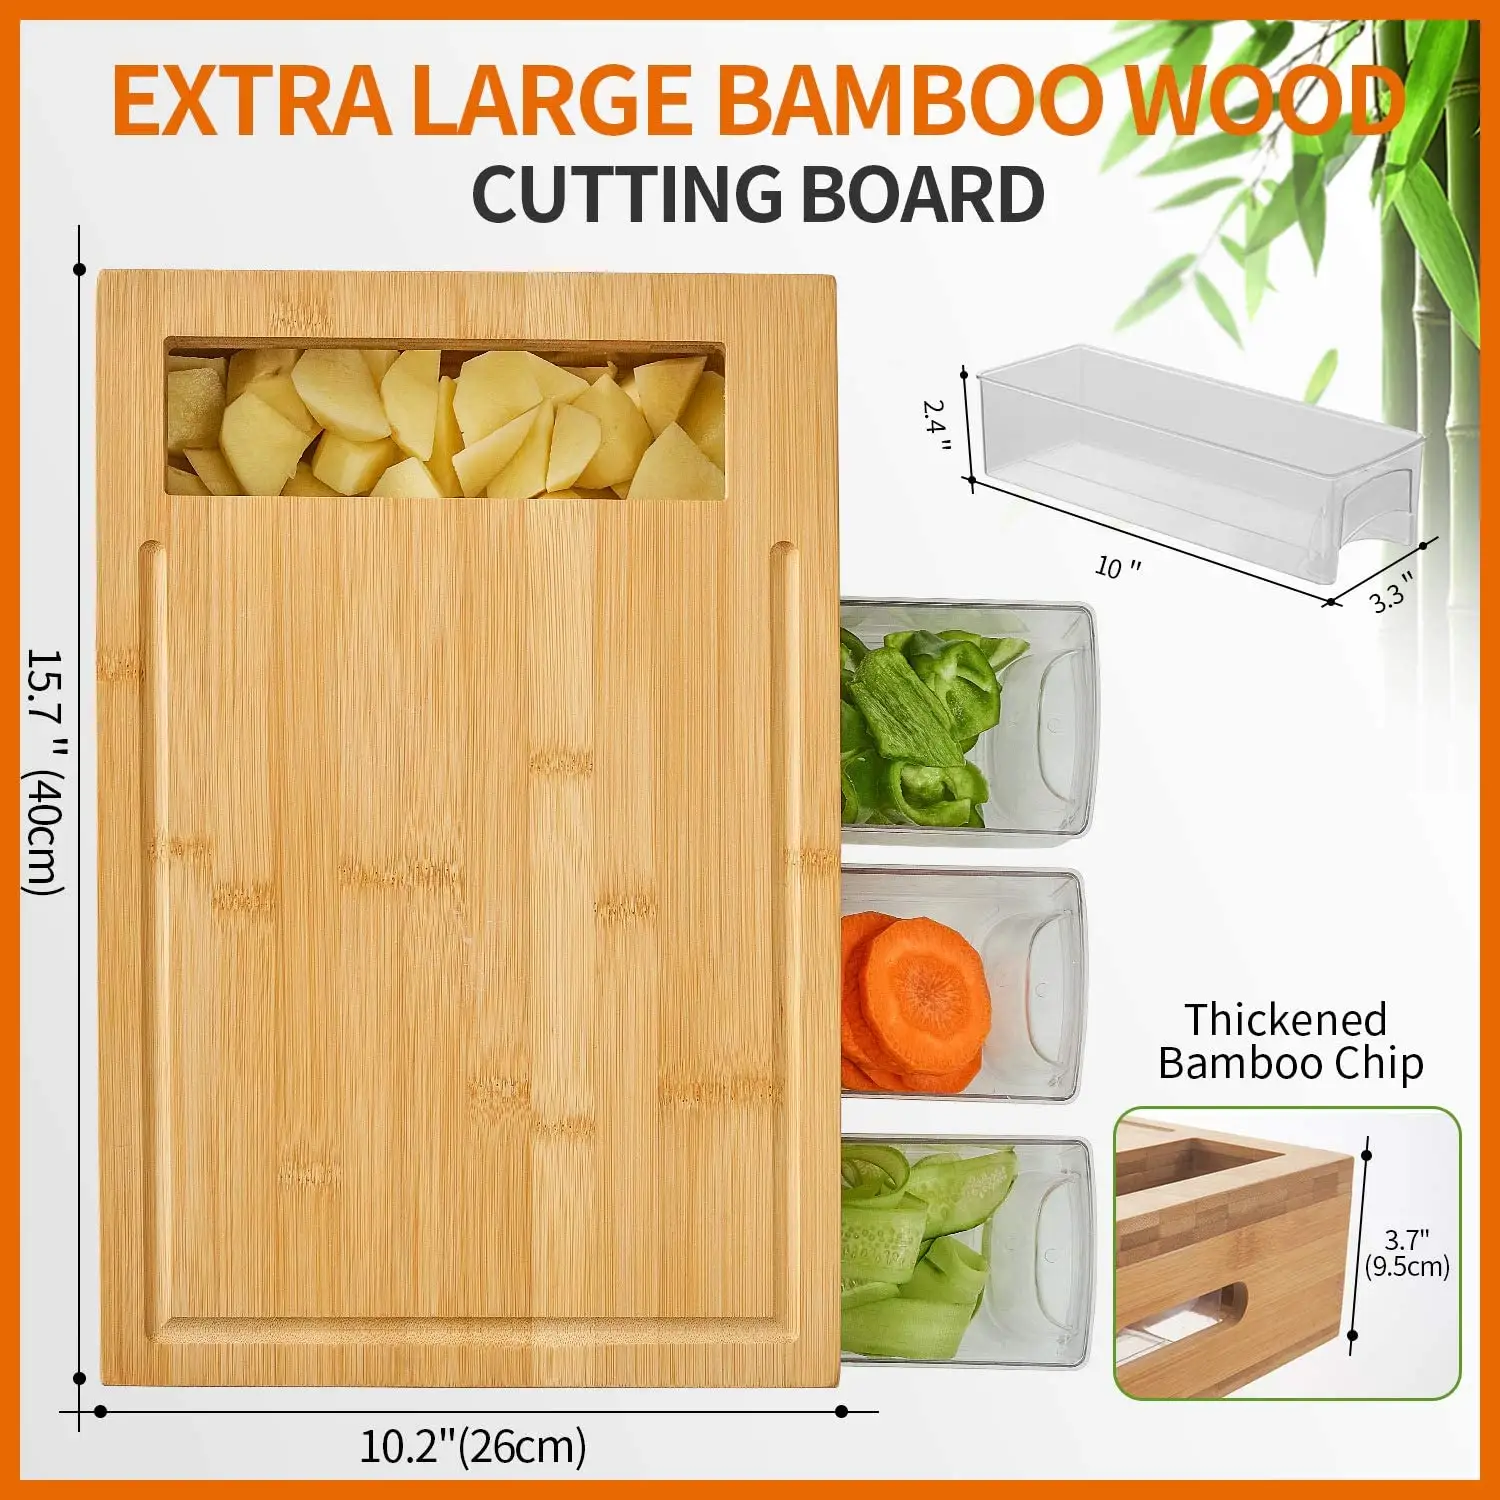 Bamboo Cutting Board 4 Containers Organic Thick Strong Bamboo Cutting Board Large Cutting Board With Juice Grooves Carving Board With Trays For Food